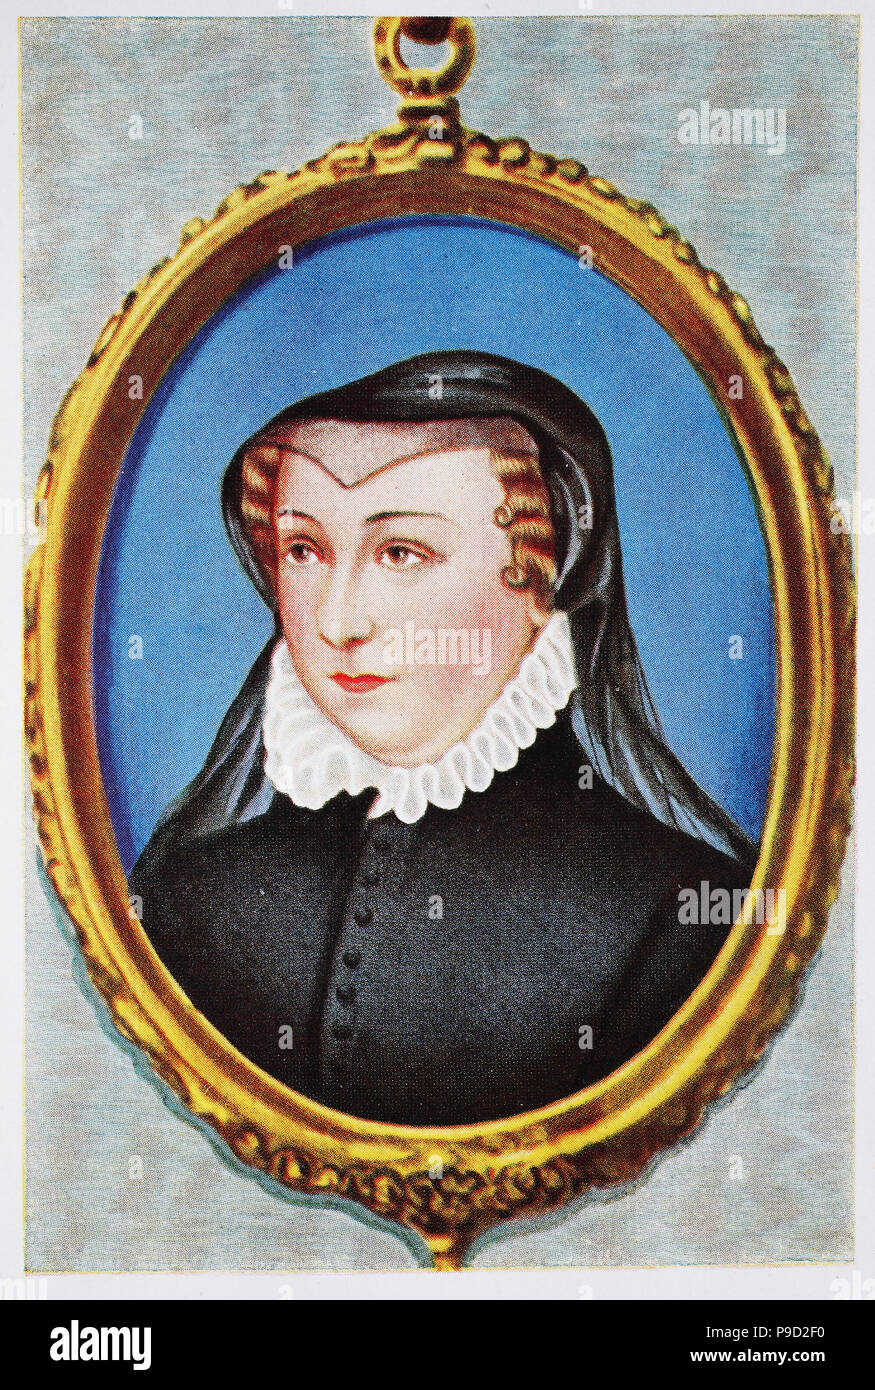 Catherine de Medic; 13 April 1519 â€“ 5 January 1589, daughter of Lorenzo II de' Medici and Madeleine de La Tour d'Auvergne, was an Italian noblewoman who was queen of France from 1547 until 1559, by marriage to King Henry II, digital improved reproduction of an original print from the year 1900 Stock Photo